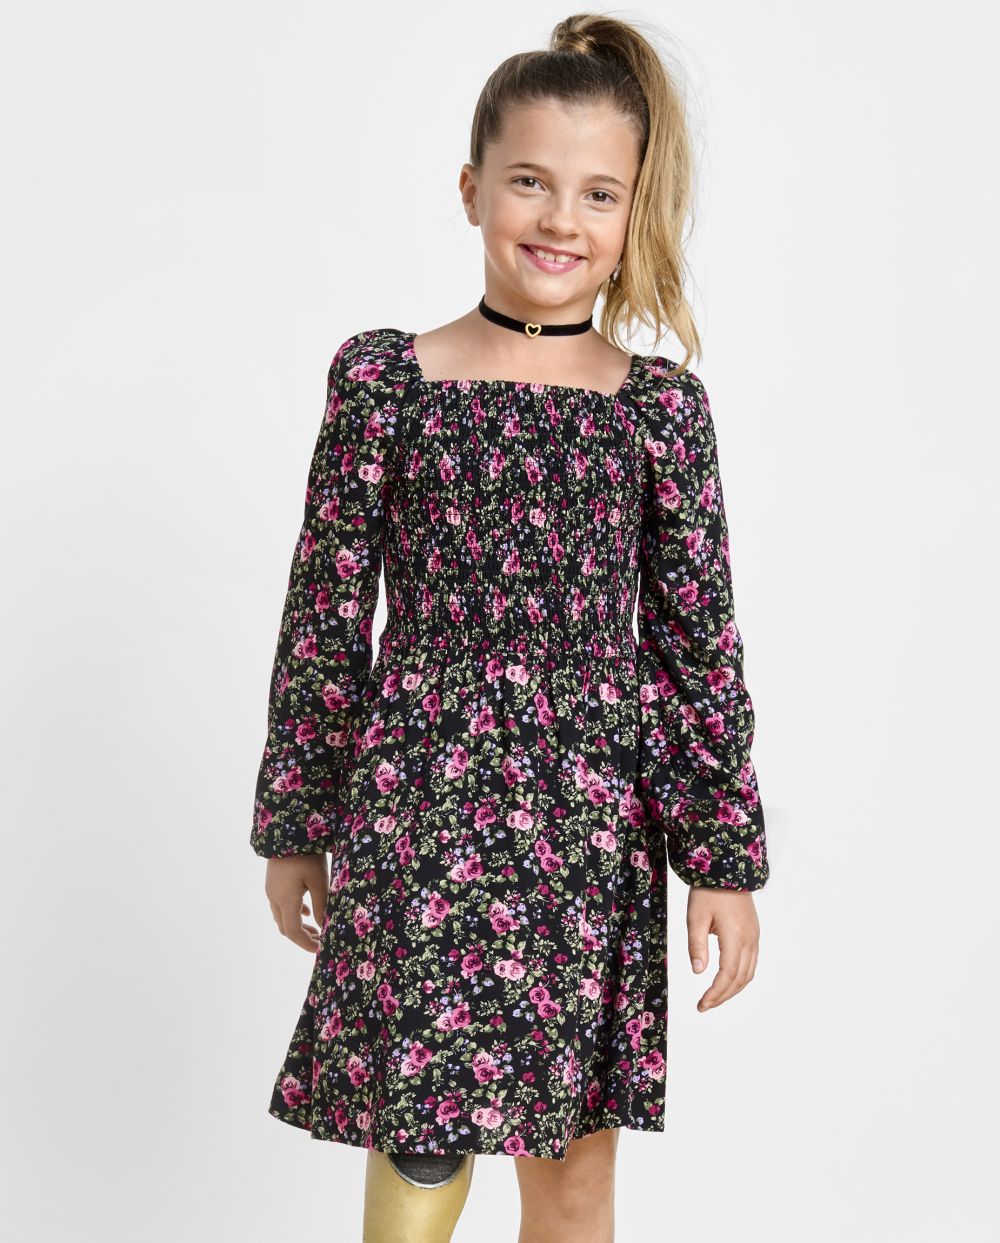 Girls Above the Knee Rayon Long Sleeves Smocked Square Neck Floral Print Dress